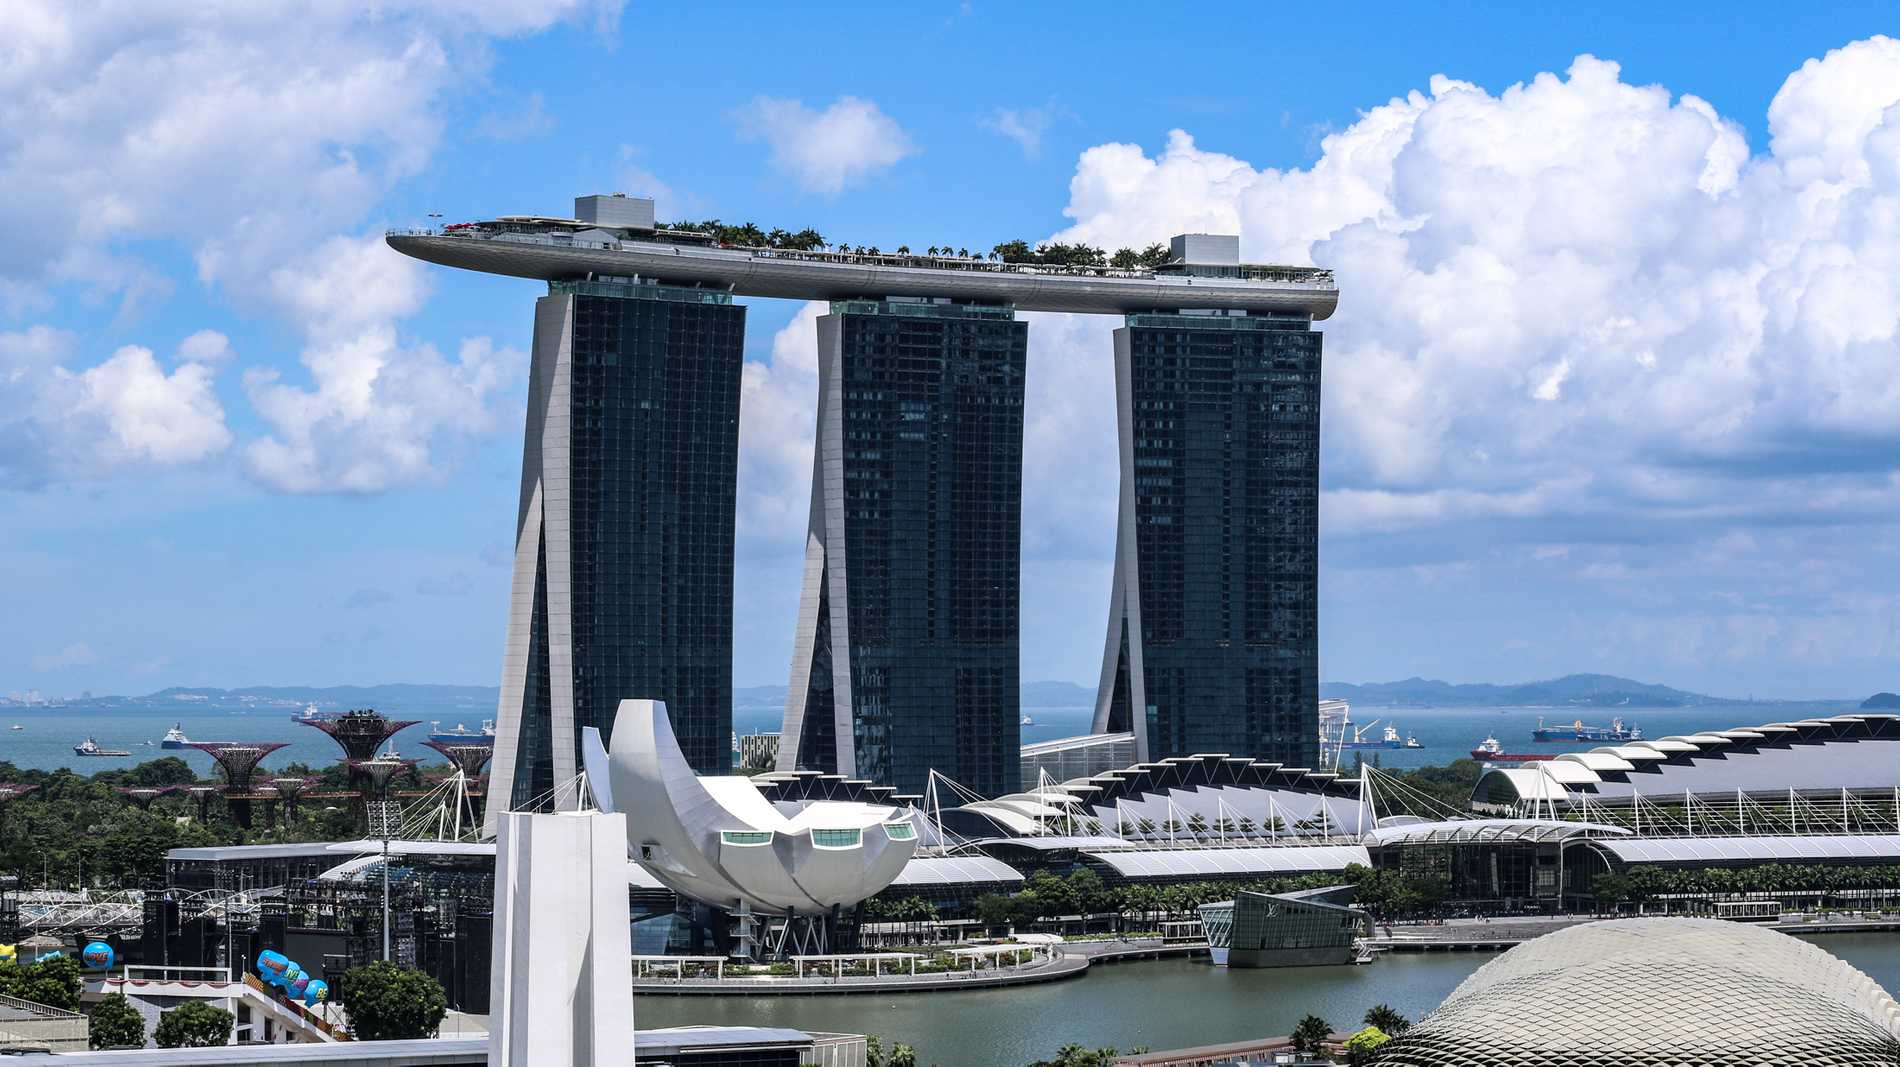 The 55-storey Marina Bay Sands hotel consisting of 3 towers with an infinity pool looking like a ship sailing above them.